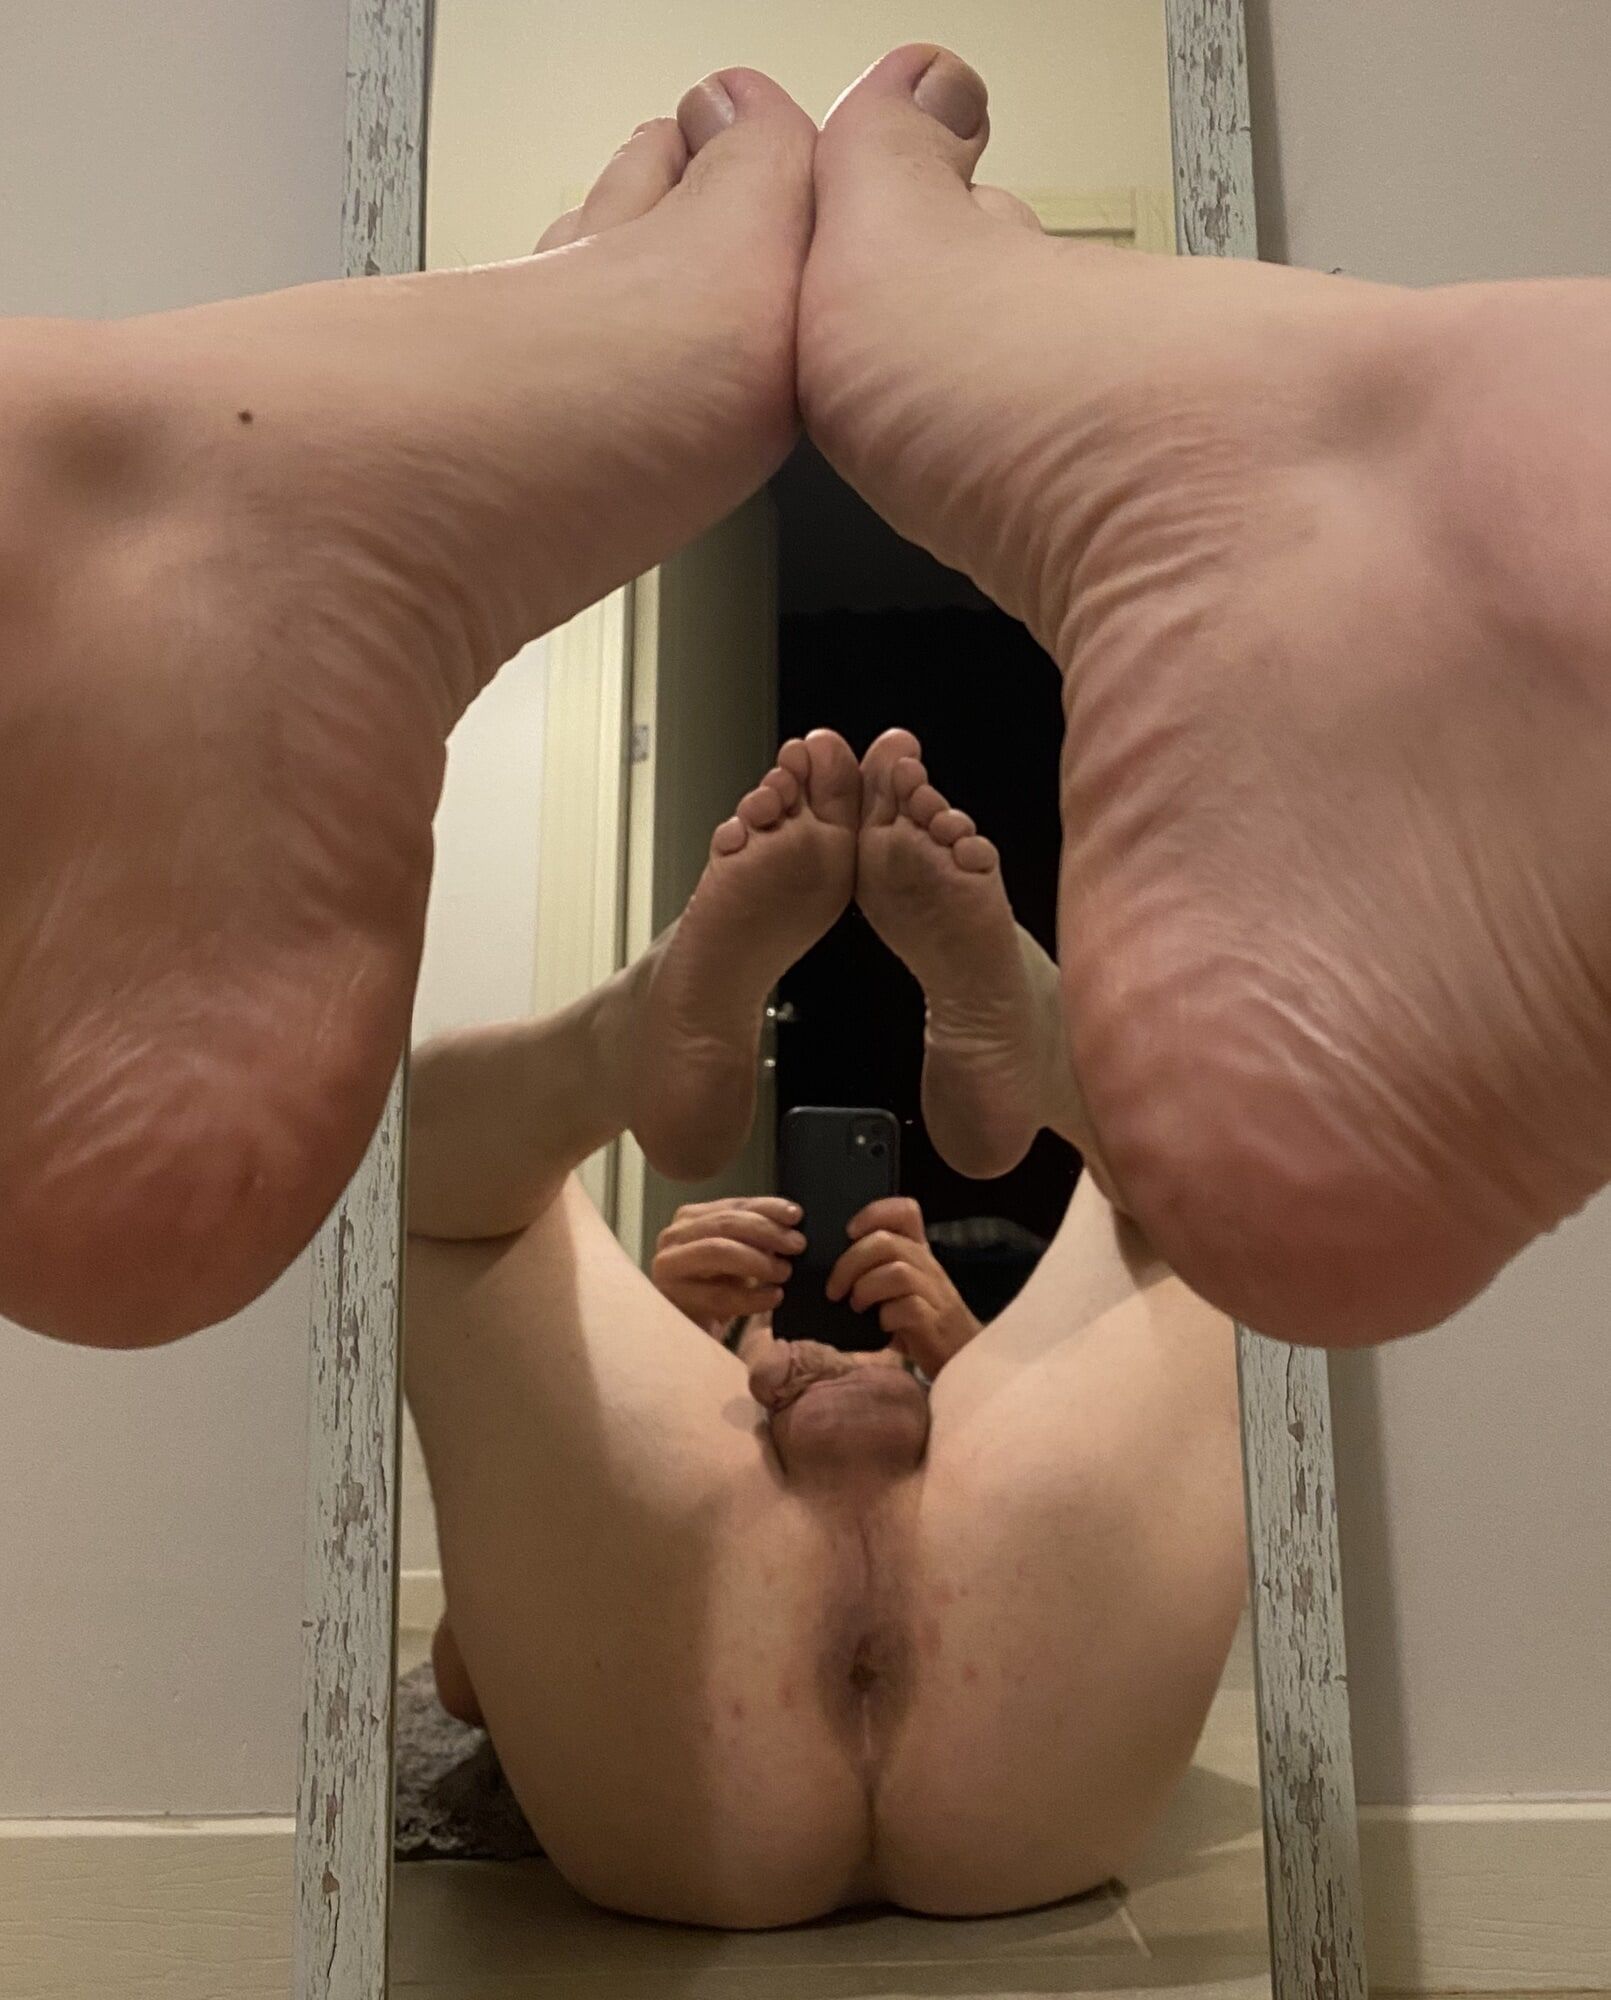 Love to see my feet in the mirror #8